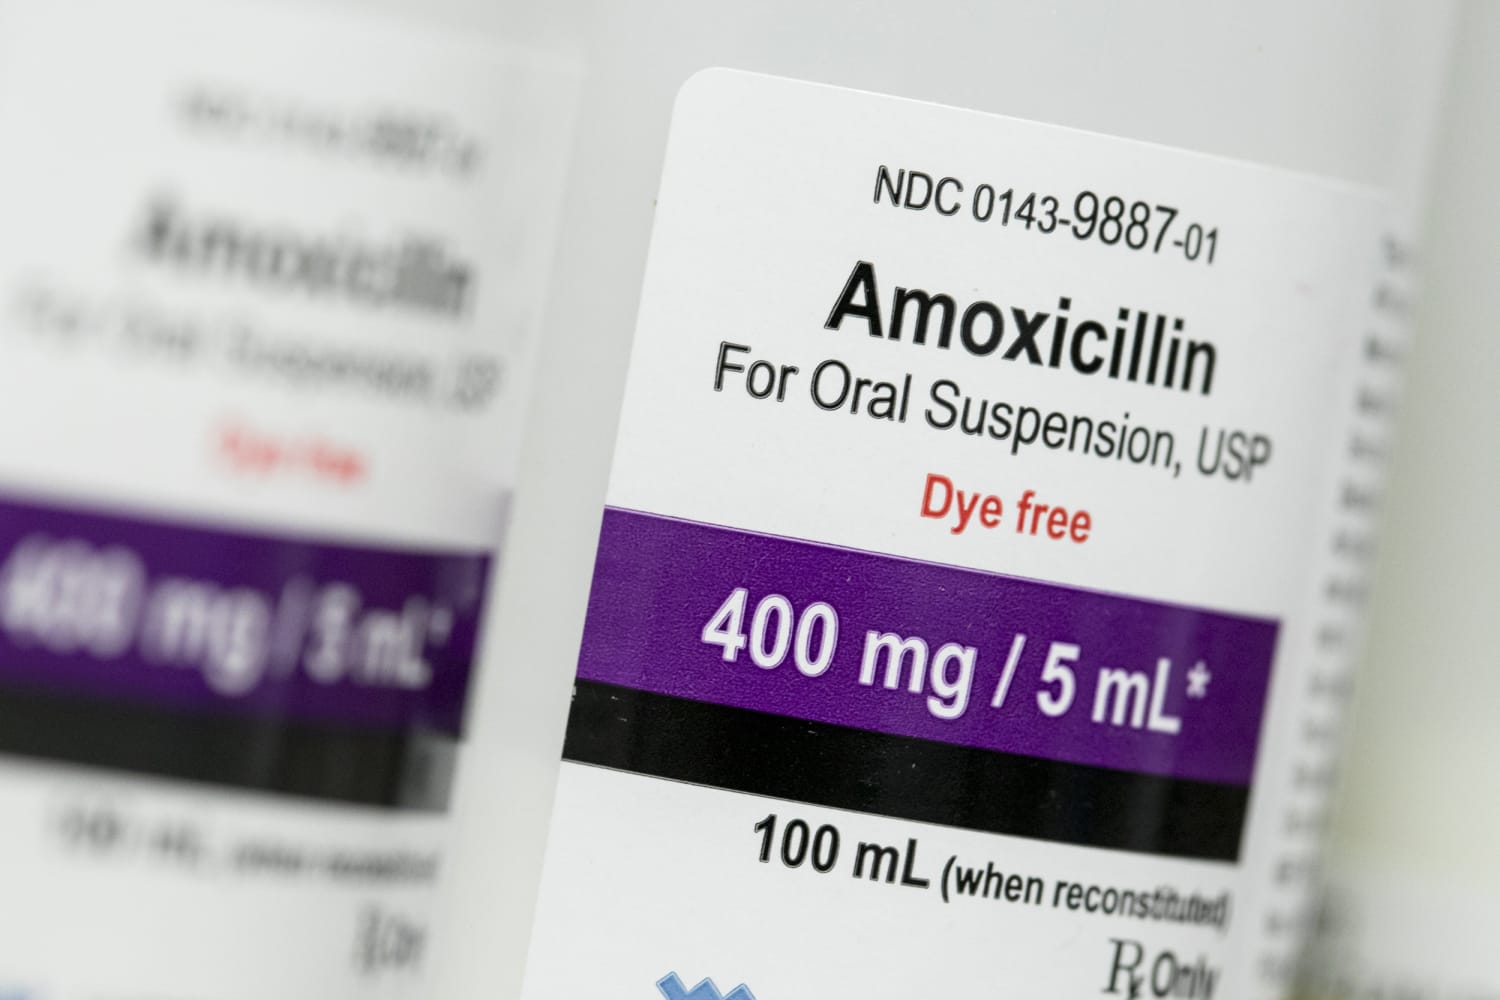 Adderall and amoxicillin shortages raise questions about transparency in Big Pharma